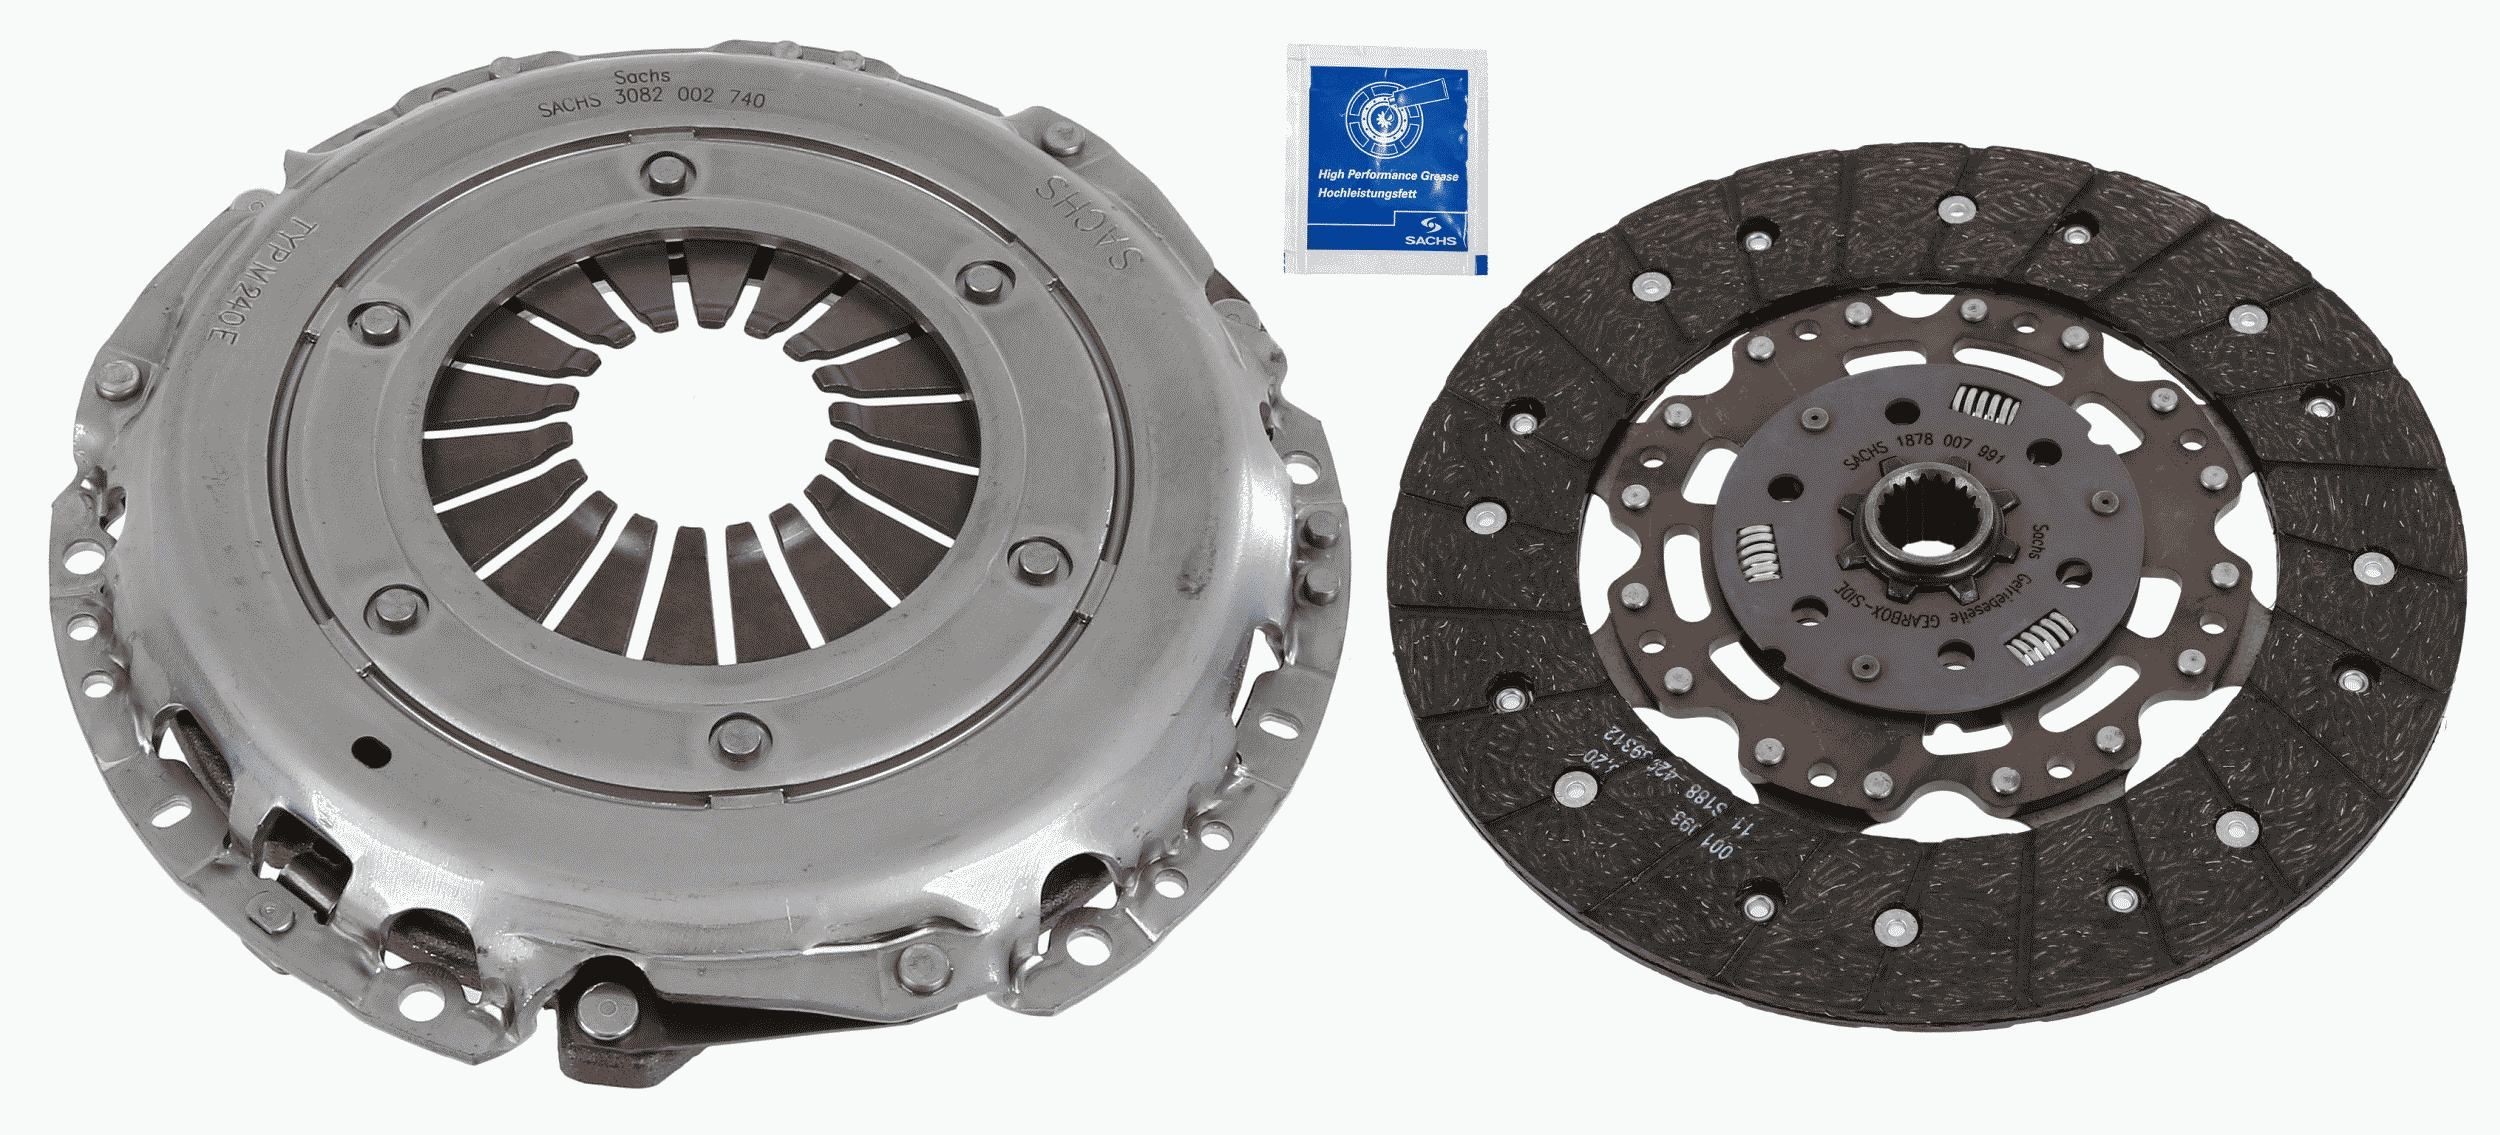 Chevrolet Clutch kit SACHS 3000 970 145 at a good price